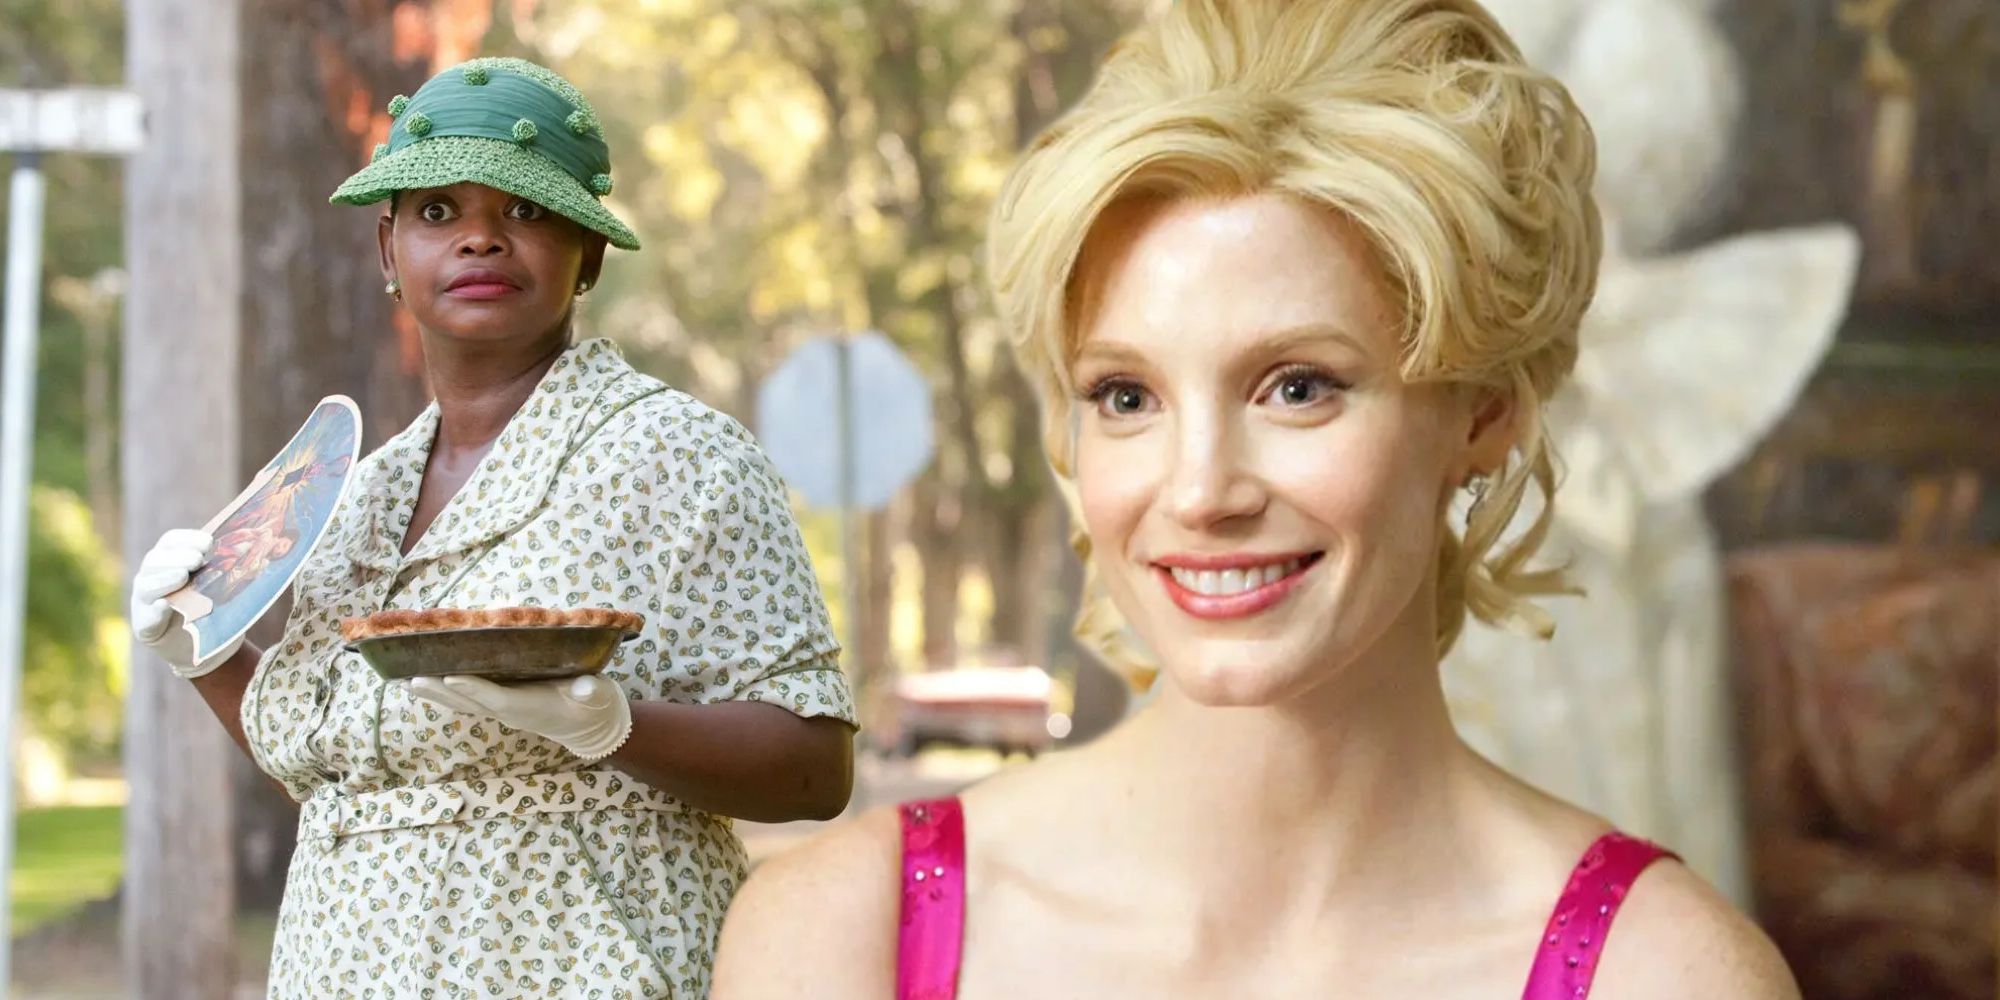 A composite image of Jessica Chastain and Octavia Spencer in The Help